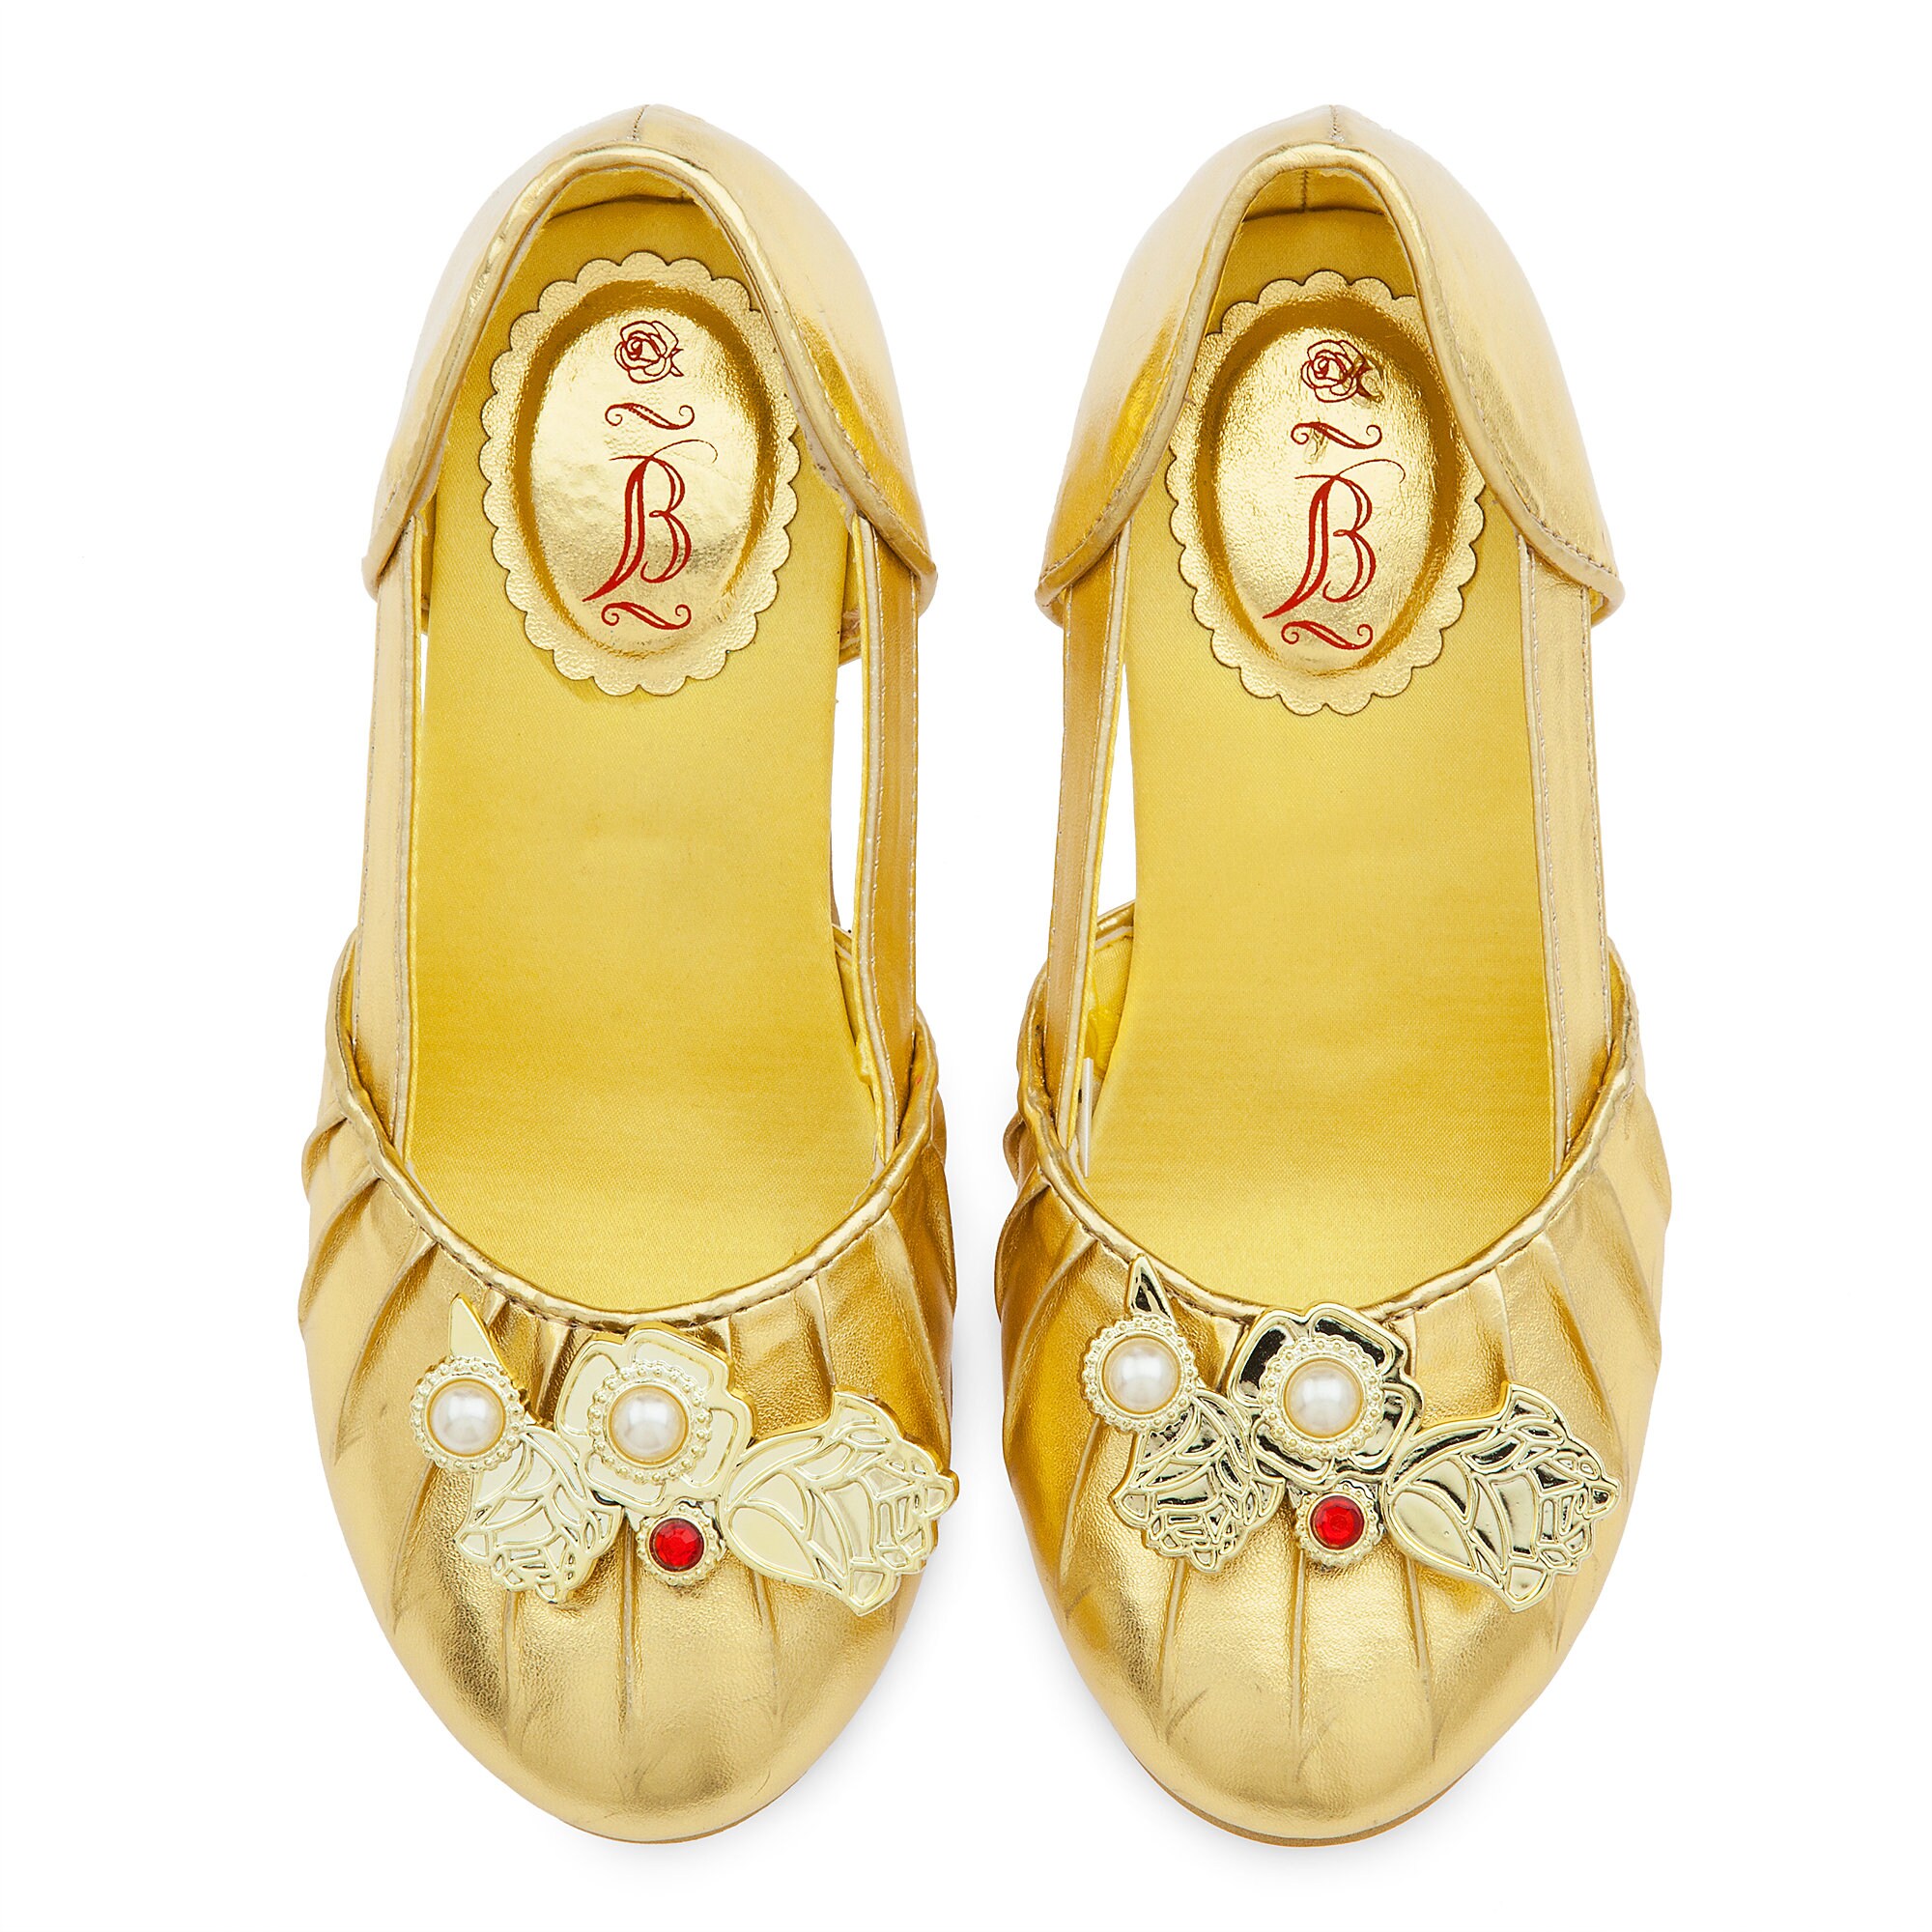 Belle Costume Shoes for Kids Beauty and the Beast